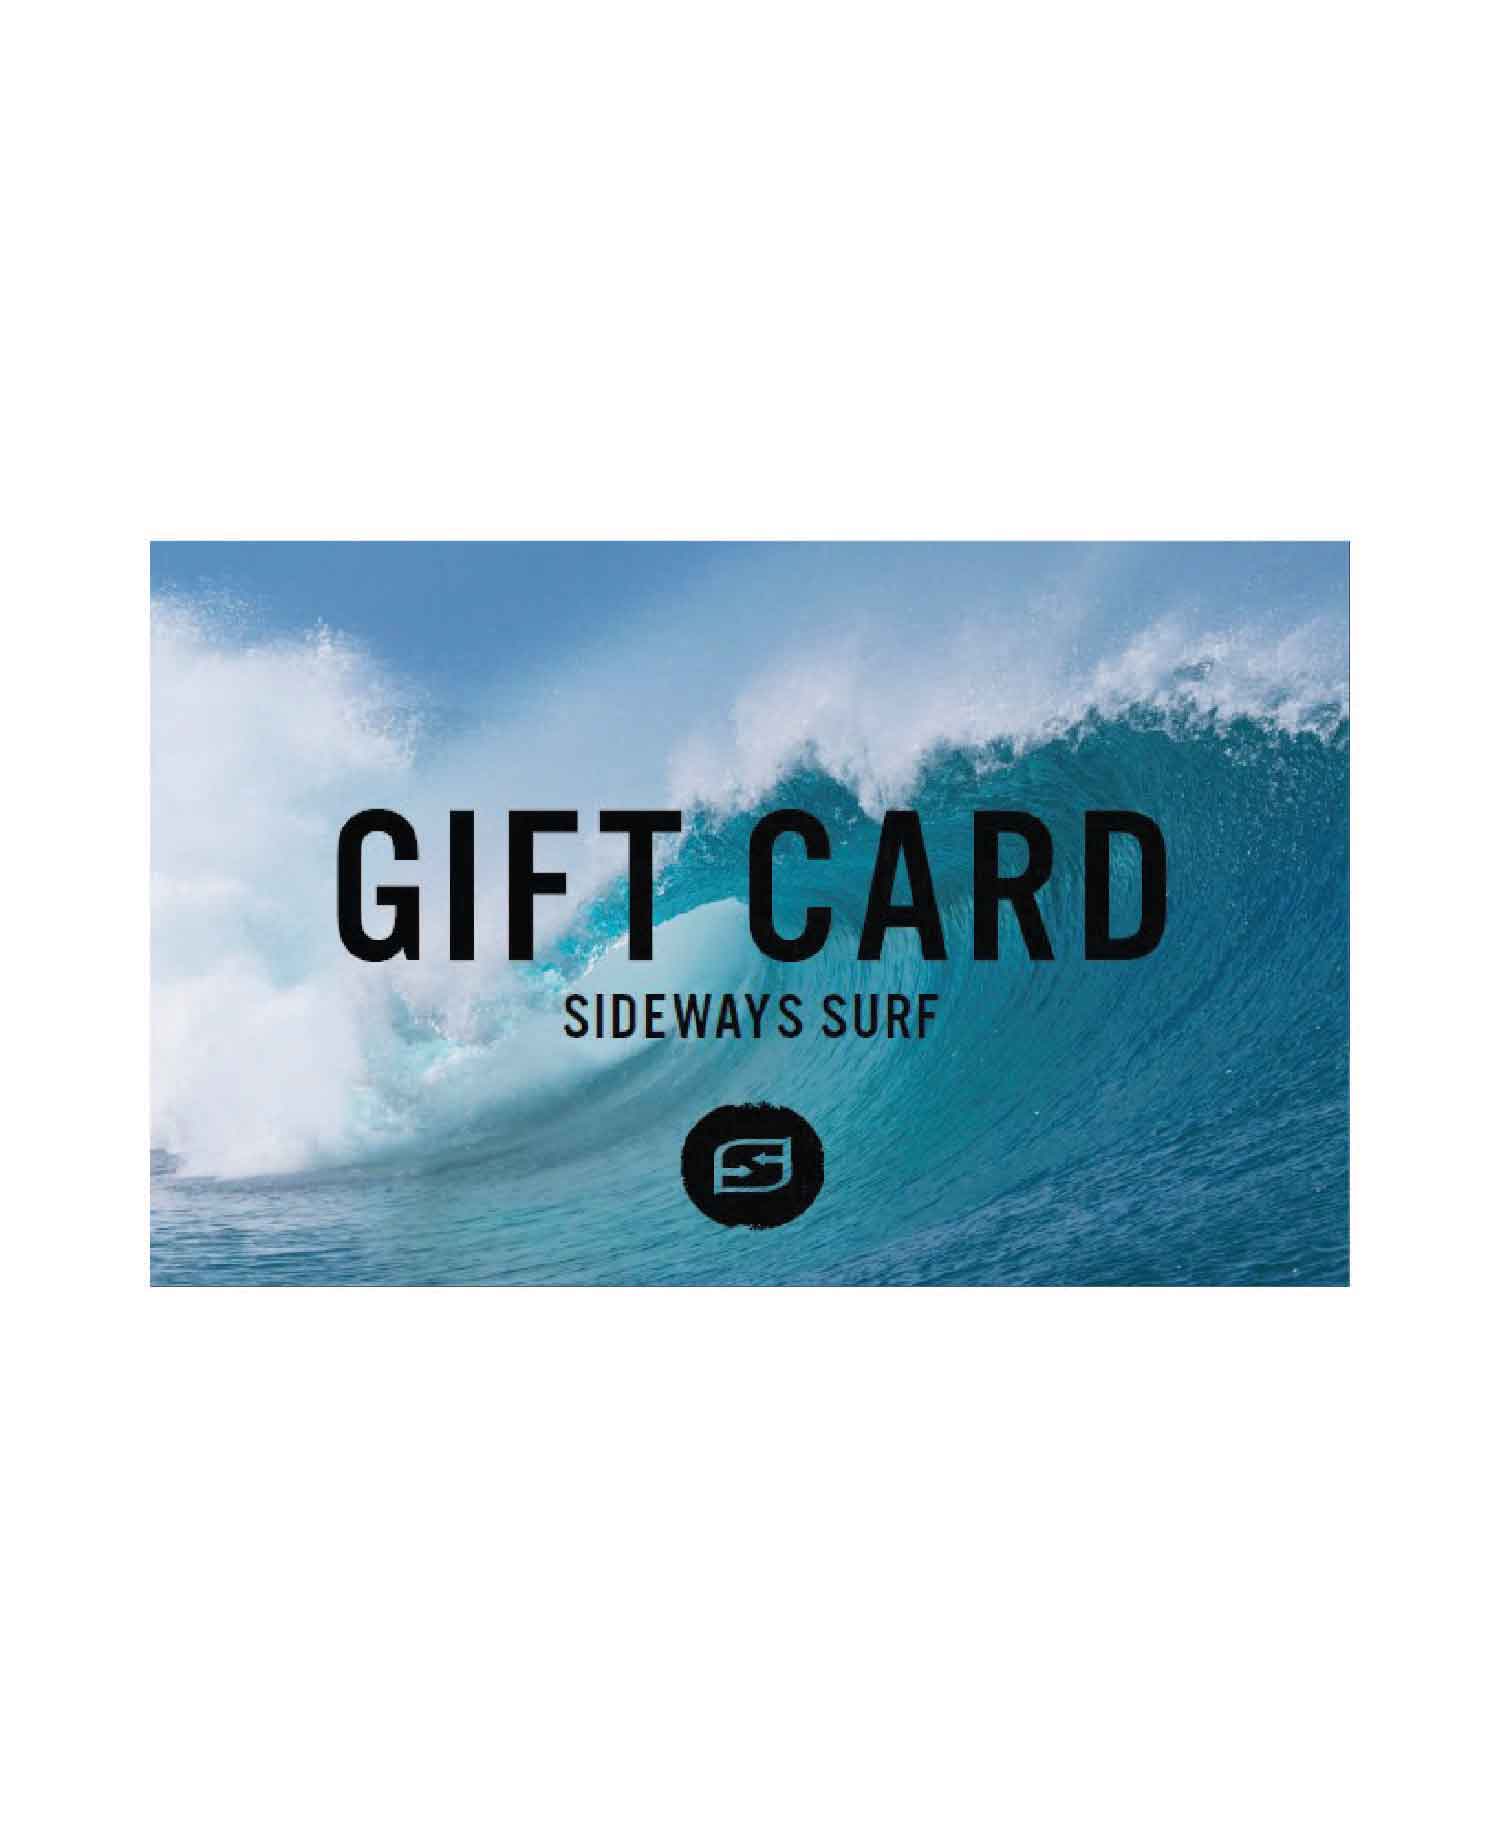 SIDEWAYS STORE PHYSICAL GIFT CARD